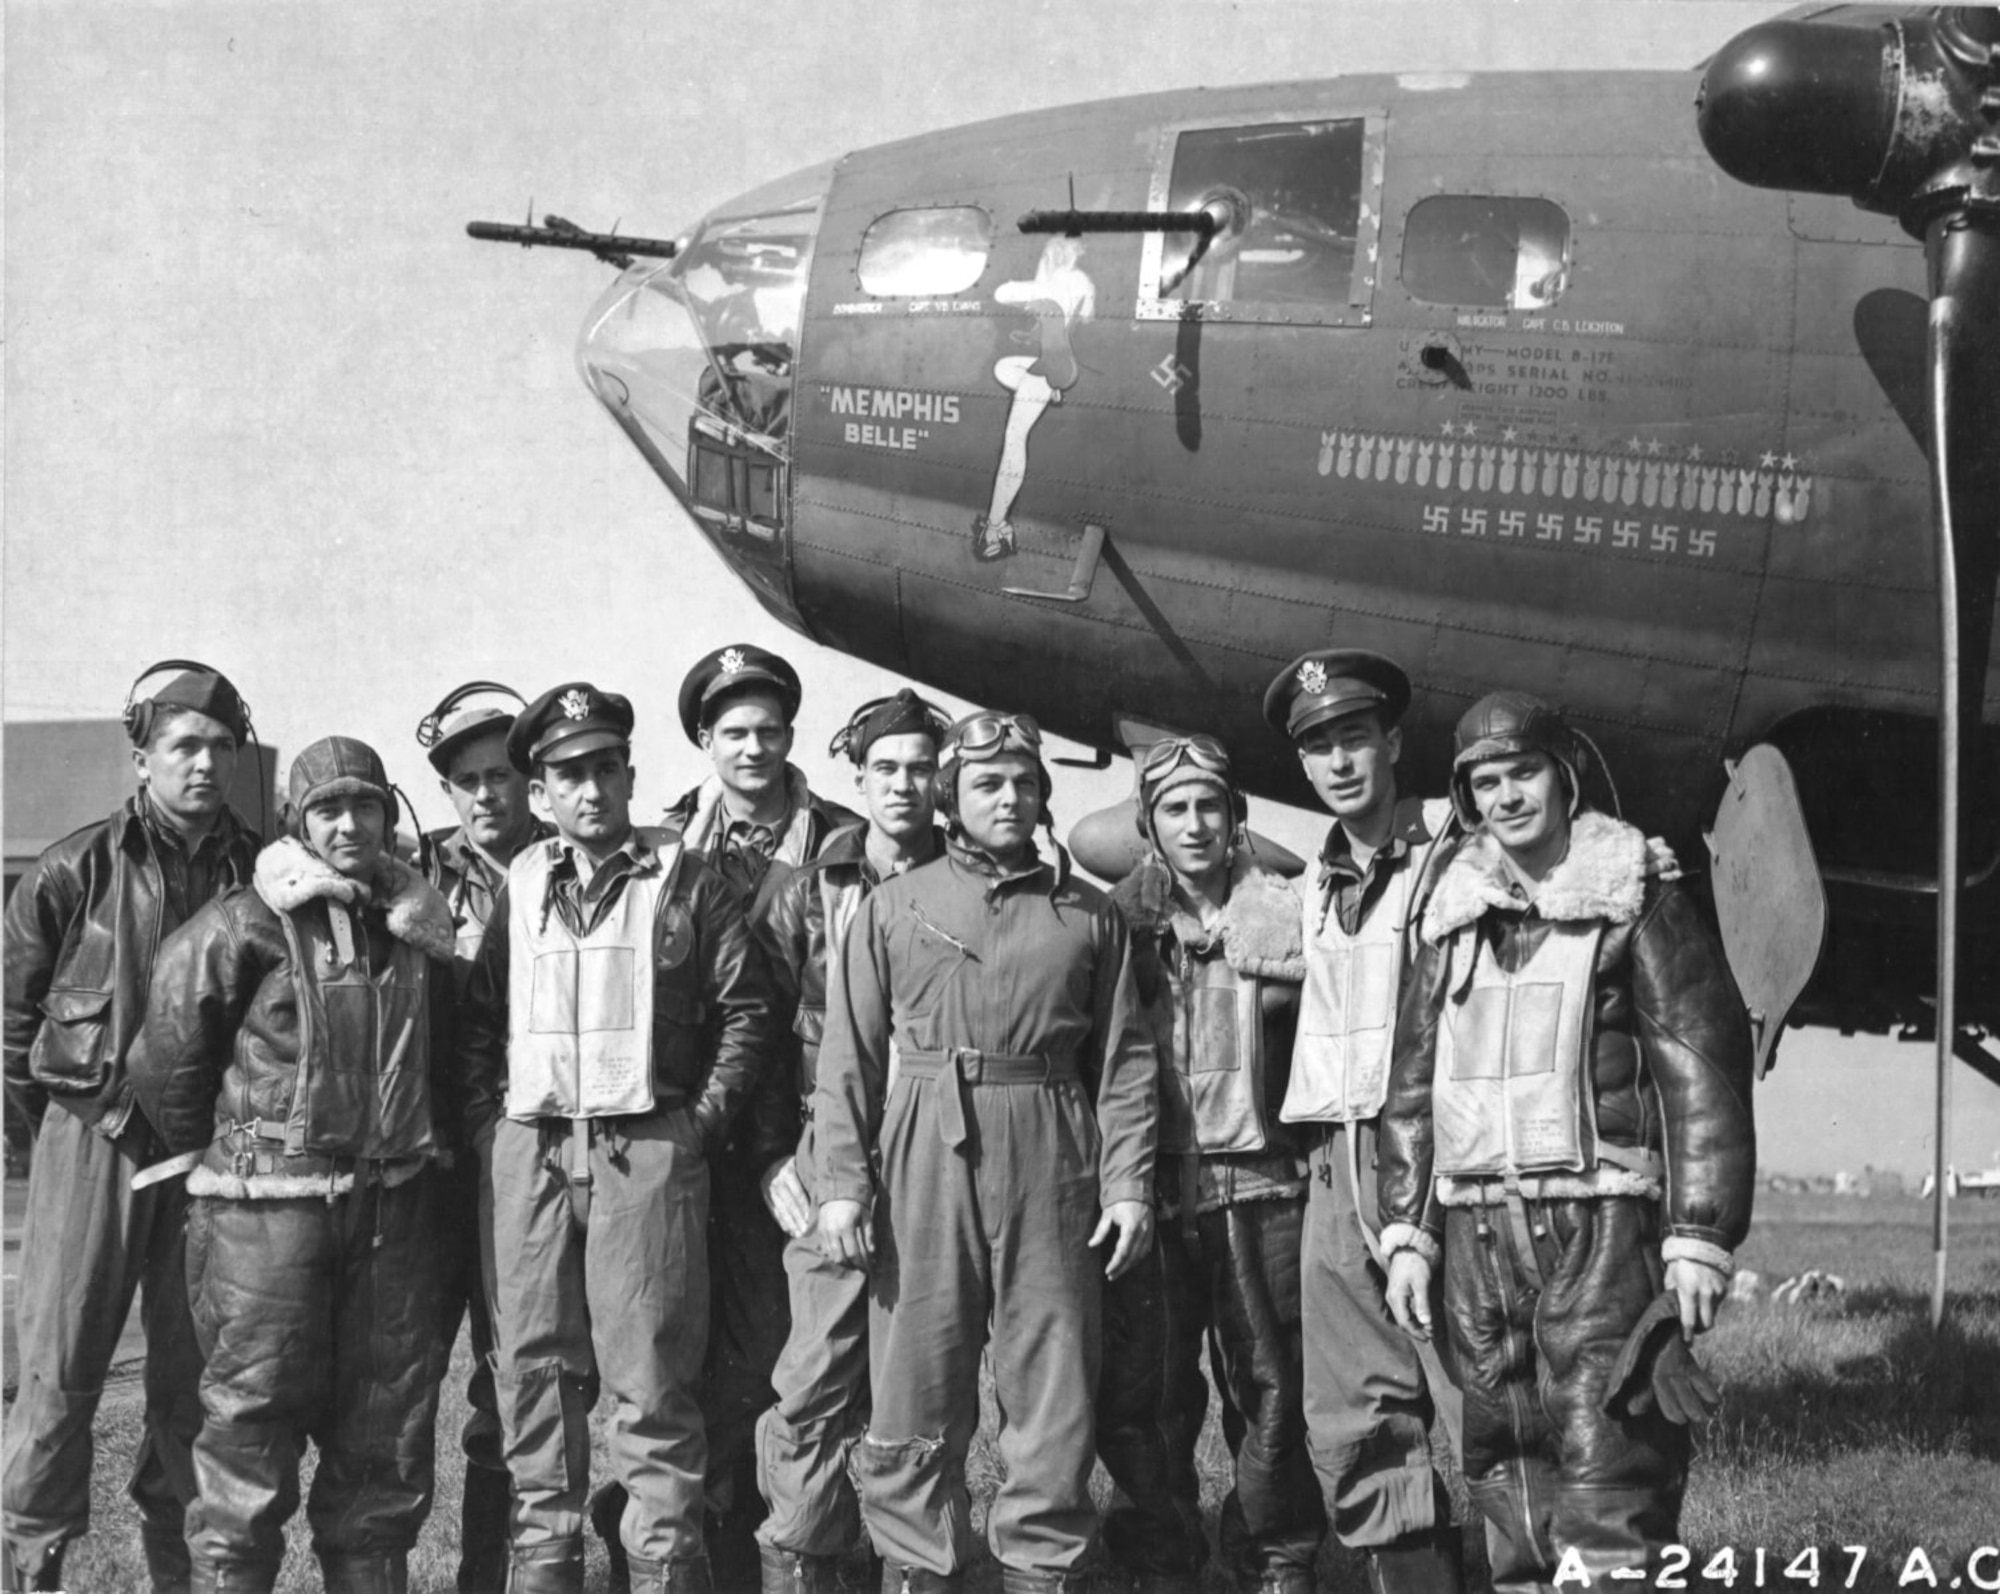 The crew of the Boeing B-17 "Memphis Belle" is pictured at an air base in England after completing 25 missions over enemy territory. The crew, left to right: Tech. Sgt. Harold P. Loch, Staff Sgt. Cecil H. Scott, Tech. Sgt. Robert J. Hanson, Capt. James A. Verinis, Capt. Robert K. Morgan, Capt. Charles B. Leighton, Staff Sgt. John P. Quinlan, Staff Sgt. Casimer A. Nastal, Capt. Vincent B. Evans and Staff Sgt. Clarence B. Winchell. (U.S. Army Air Forces photo)